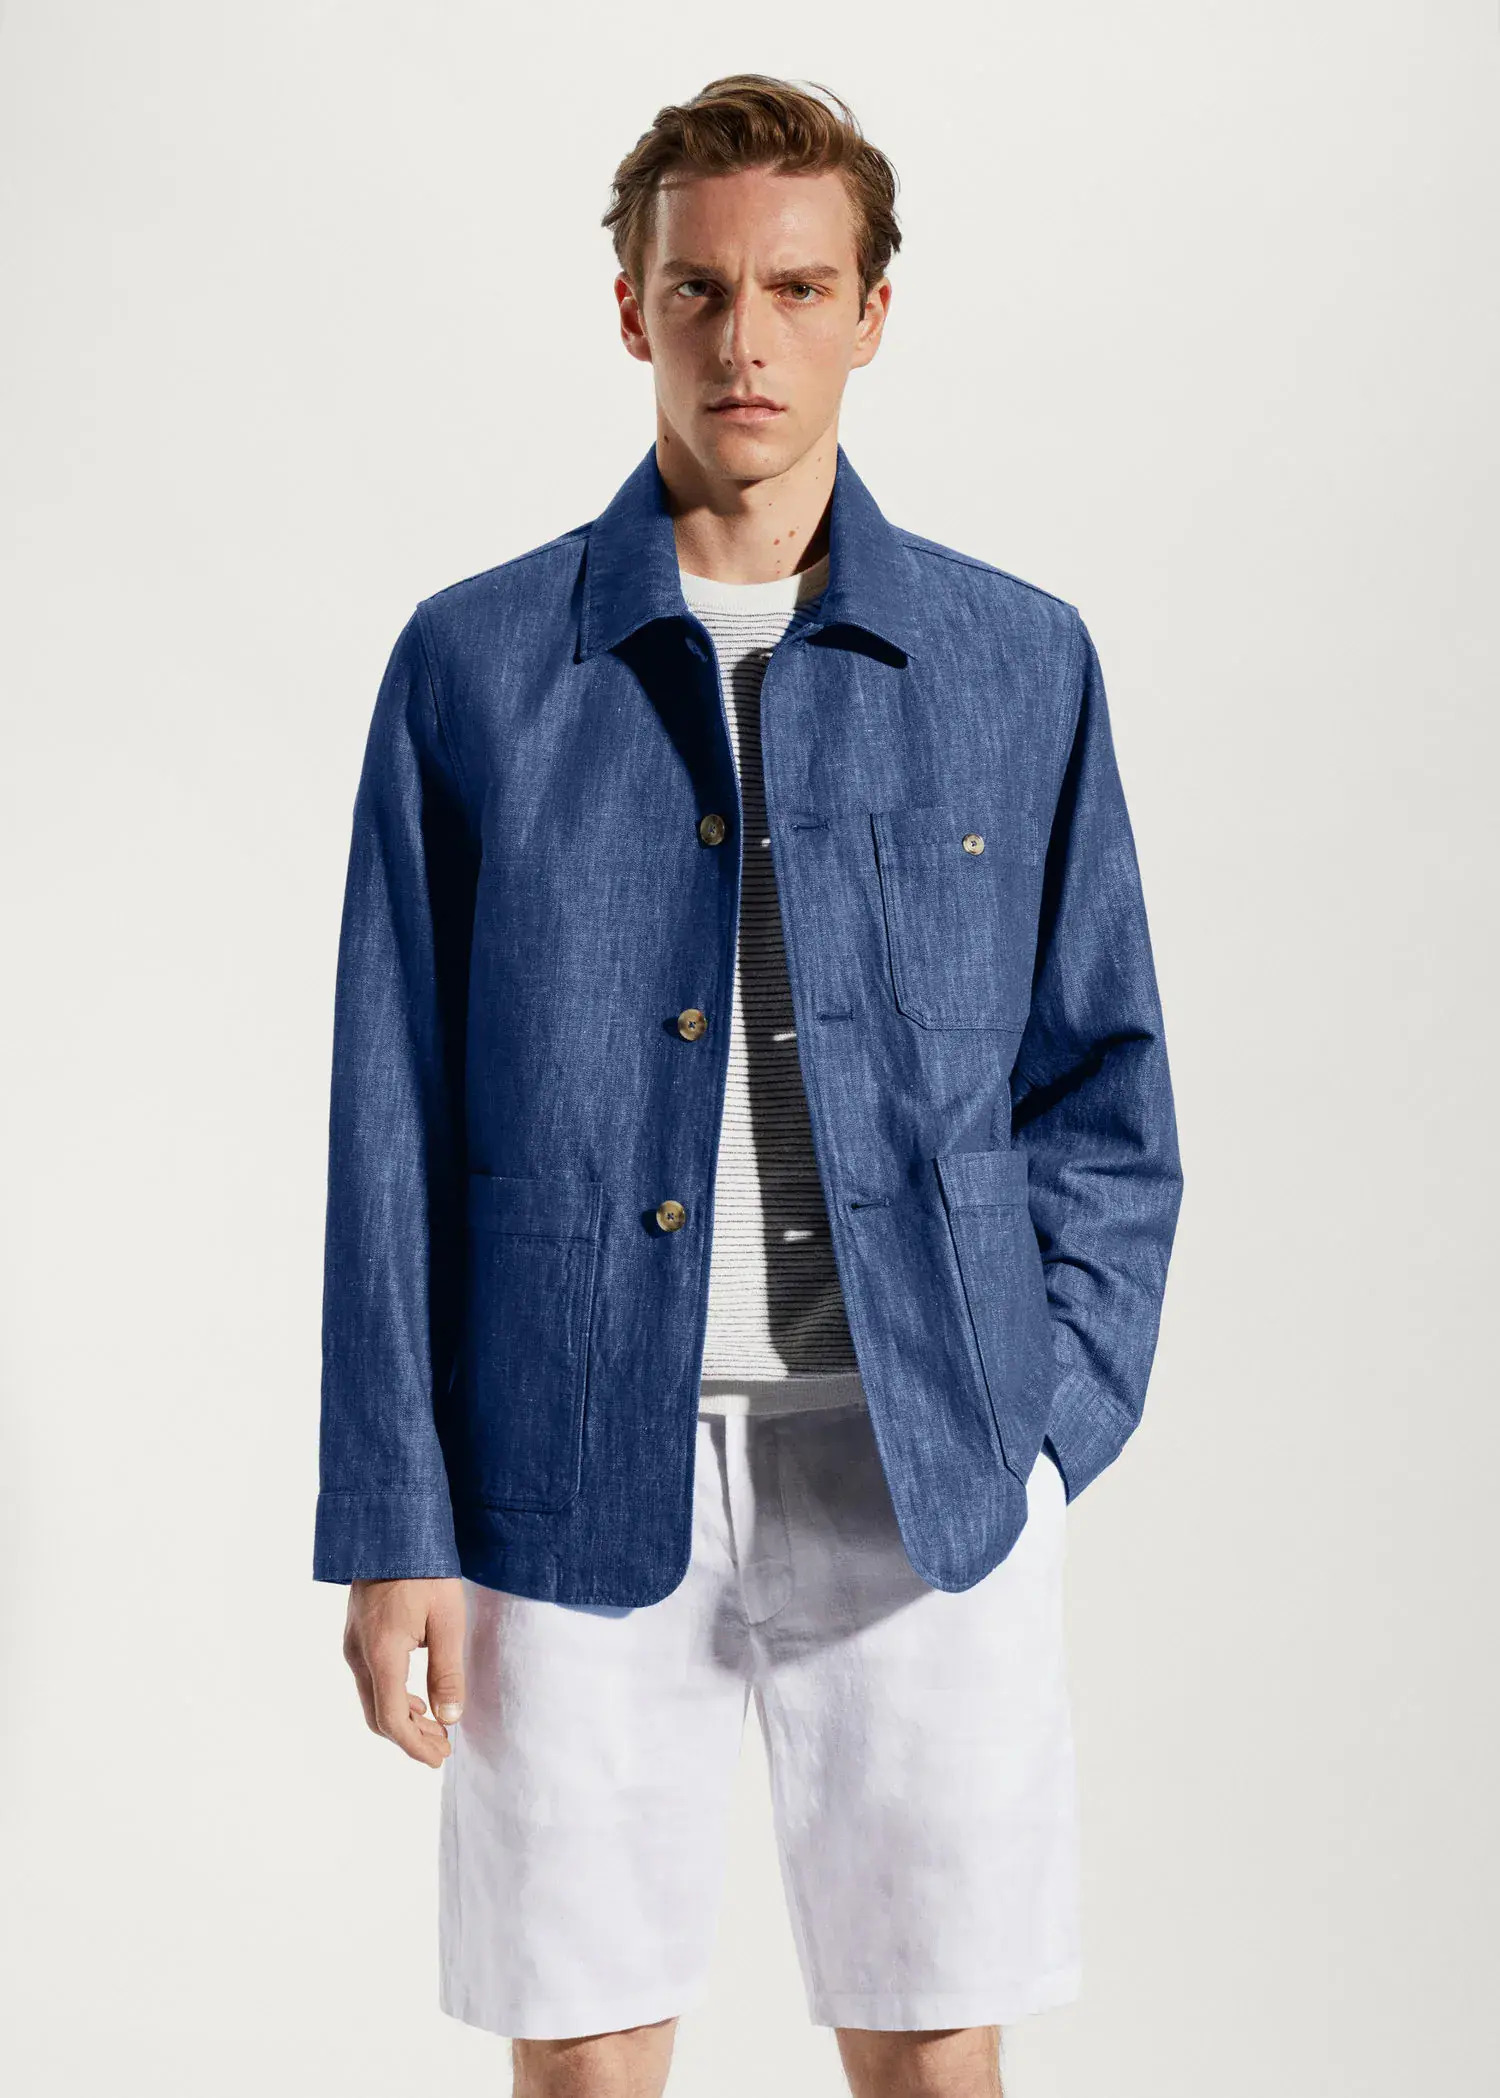 Mango Cotton-linen jacket with pockets. a man wearing a blue jacket standing in front of a wall. 